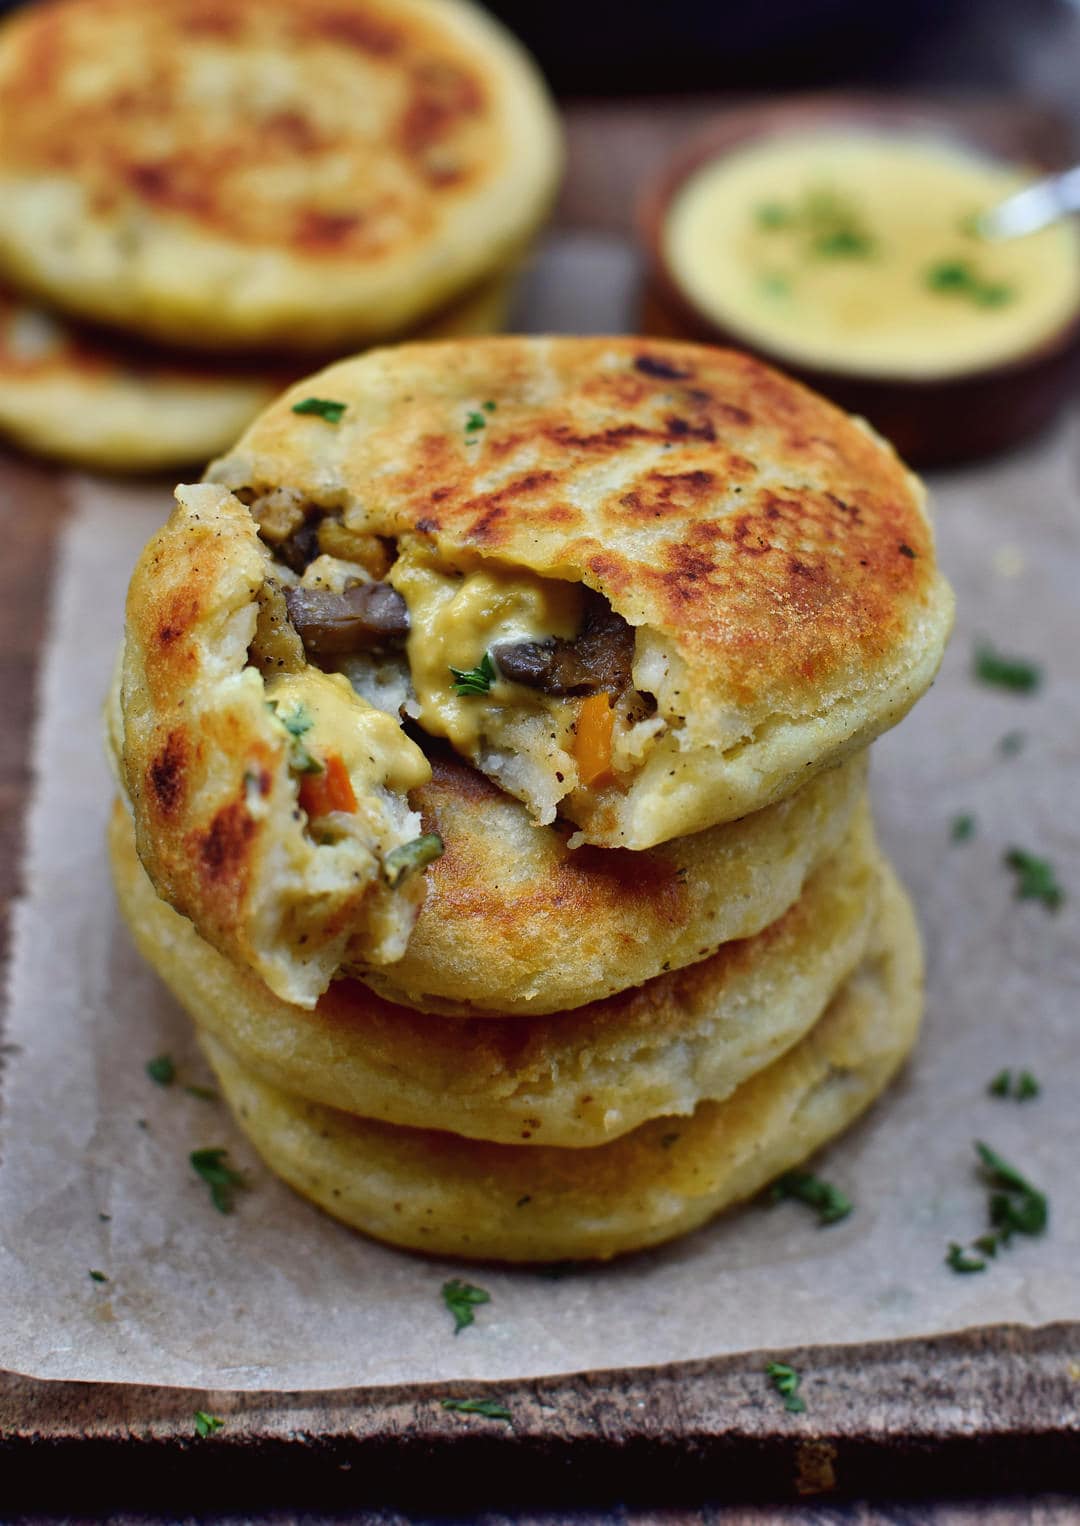 Stuffed potato cakes (arepas) with mushrooms, peppers, and vegan cheese sauce